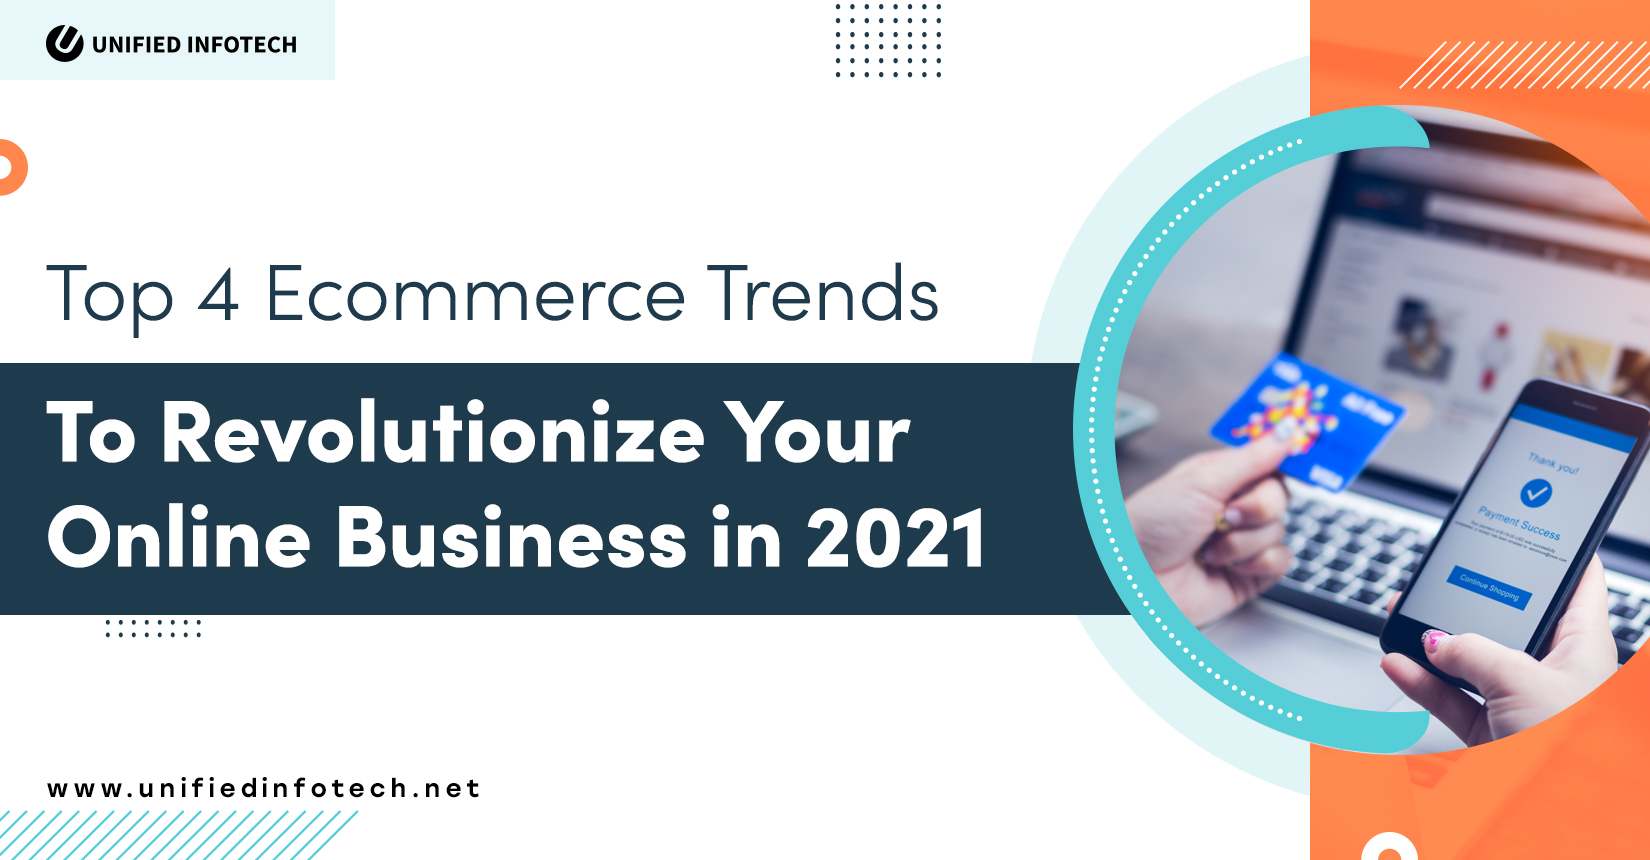 Ecommerce Trends to Accelerate Business